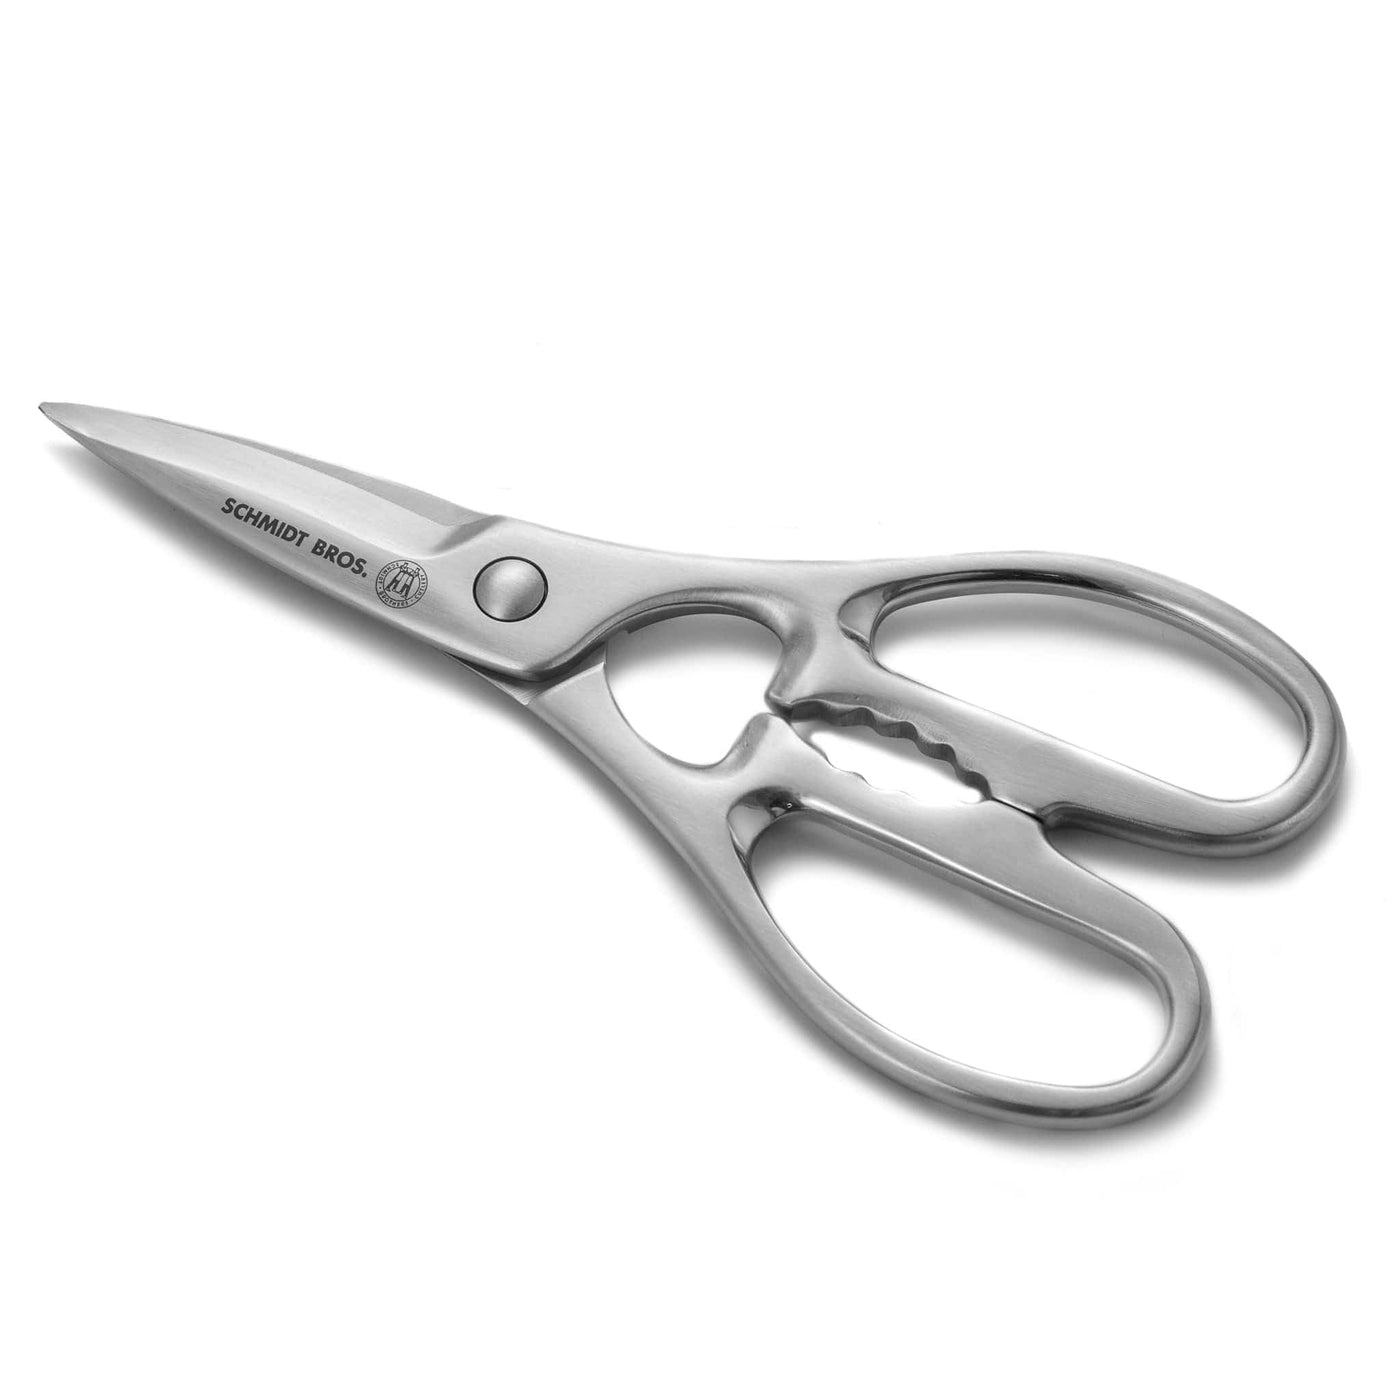 Stainless Steel Easy Cut Kitchen Shearing Scissors – Cook With Steel